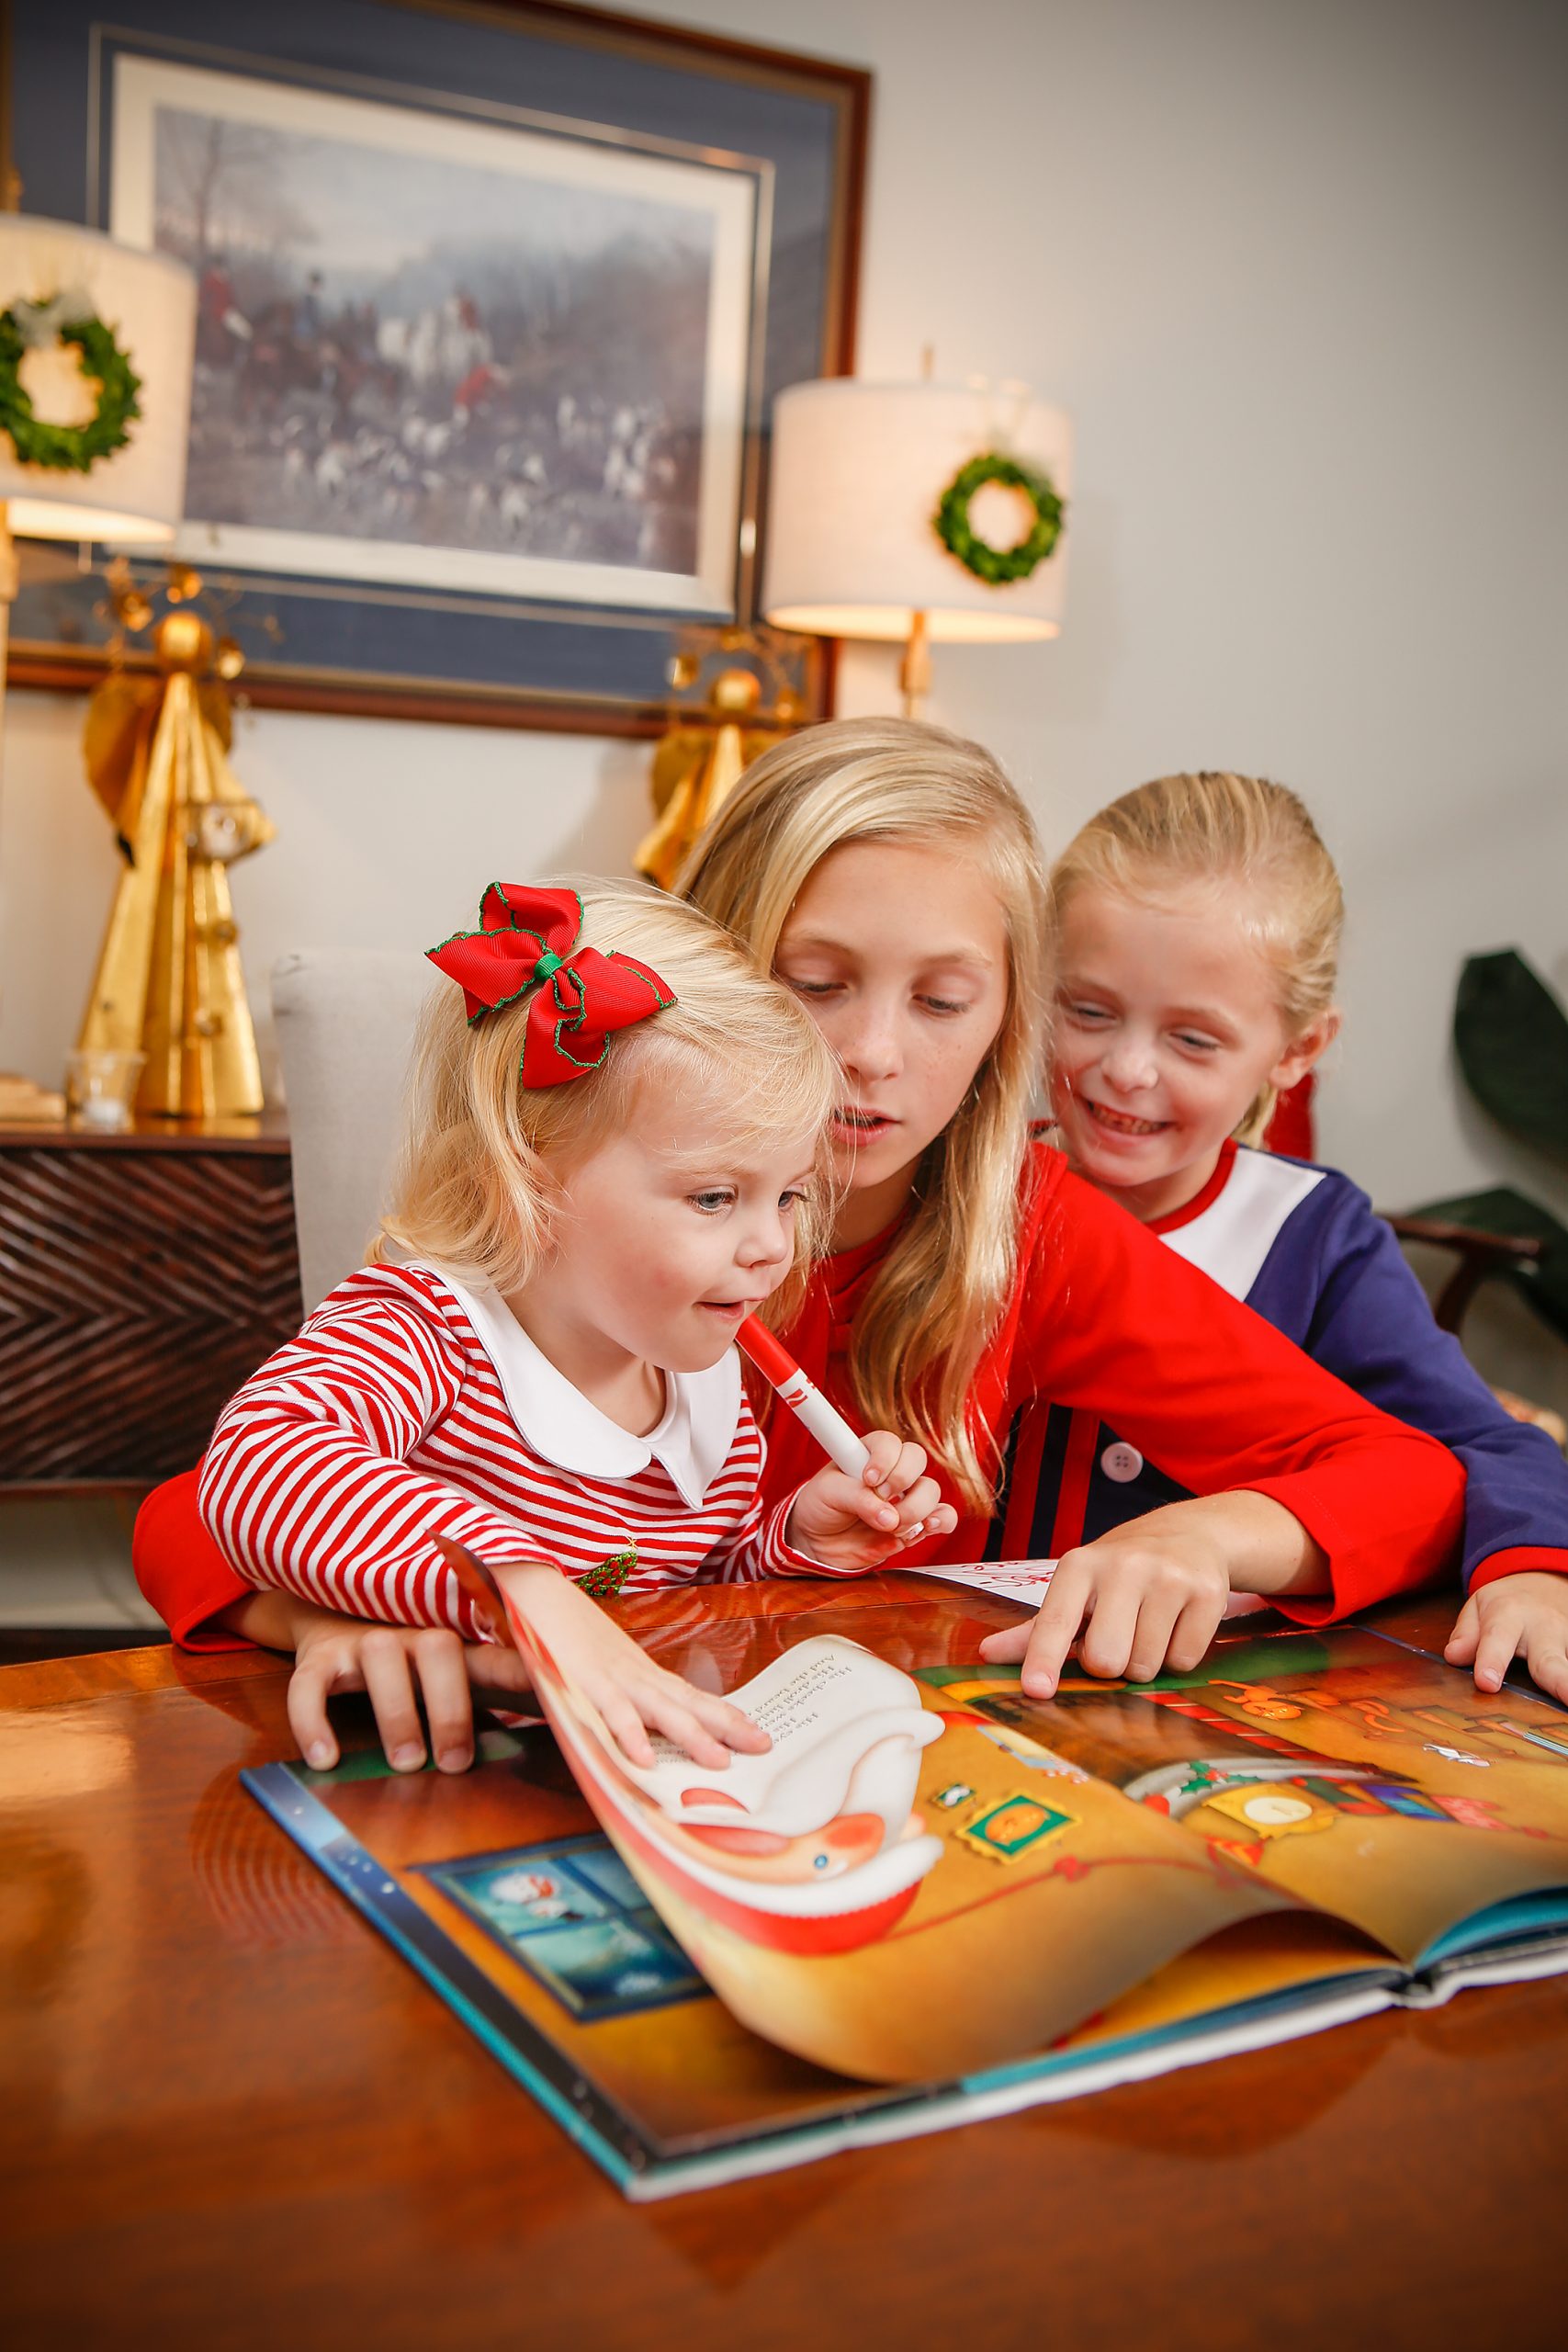 Reading The Night Before Christmas is a family tradition for the Barron family. Two-year-old Collins listens as 11-year-old Eliza and 7-year-old Charlie take turns telling the story of Santa’s visit on Christmas Eve.  